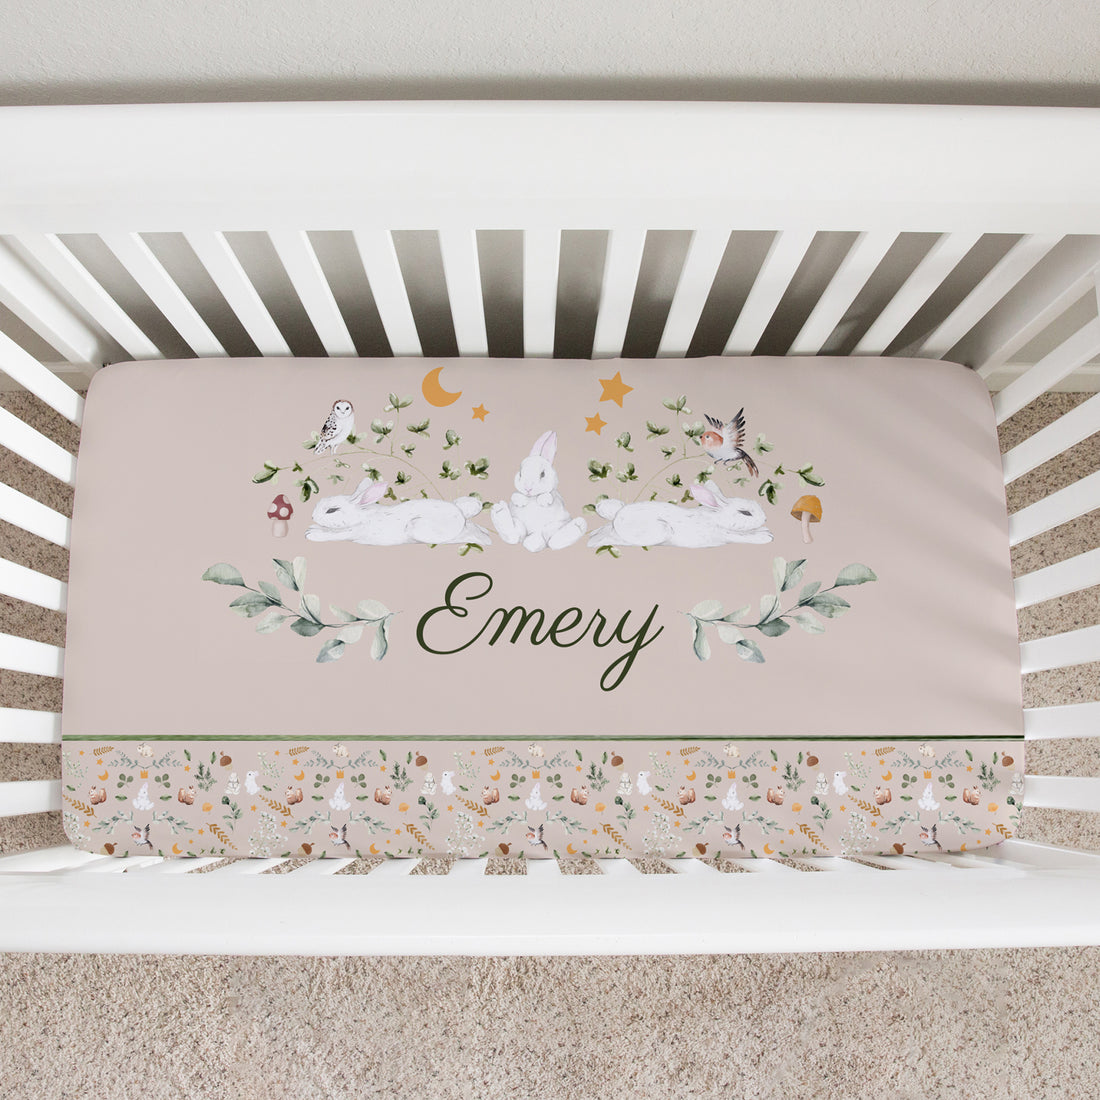 Bunny Garden Crib Sheet: Blush Pink with Personalized Name, White Bunnies & Greenery | Cozy Nursery Bedding